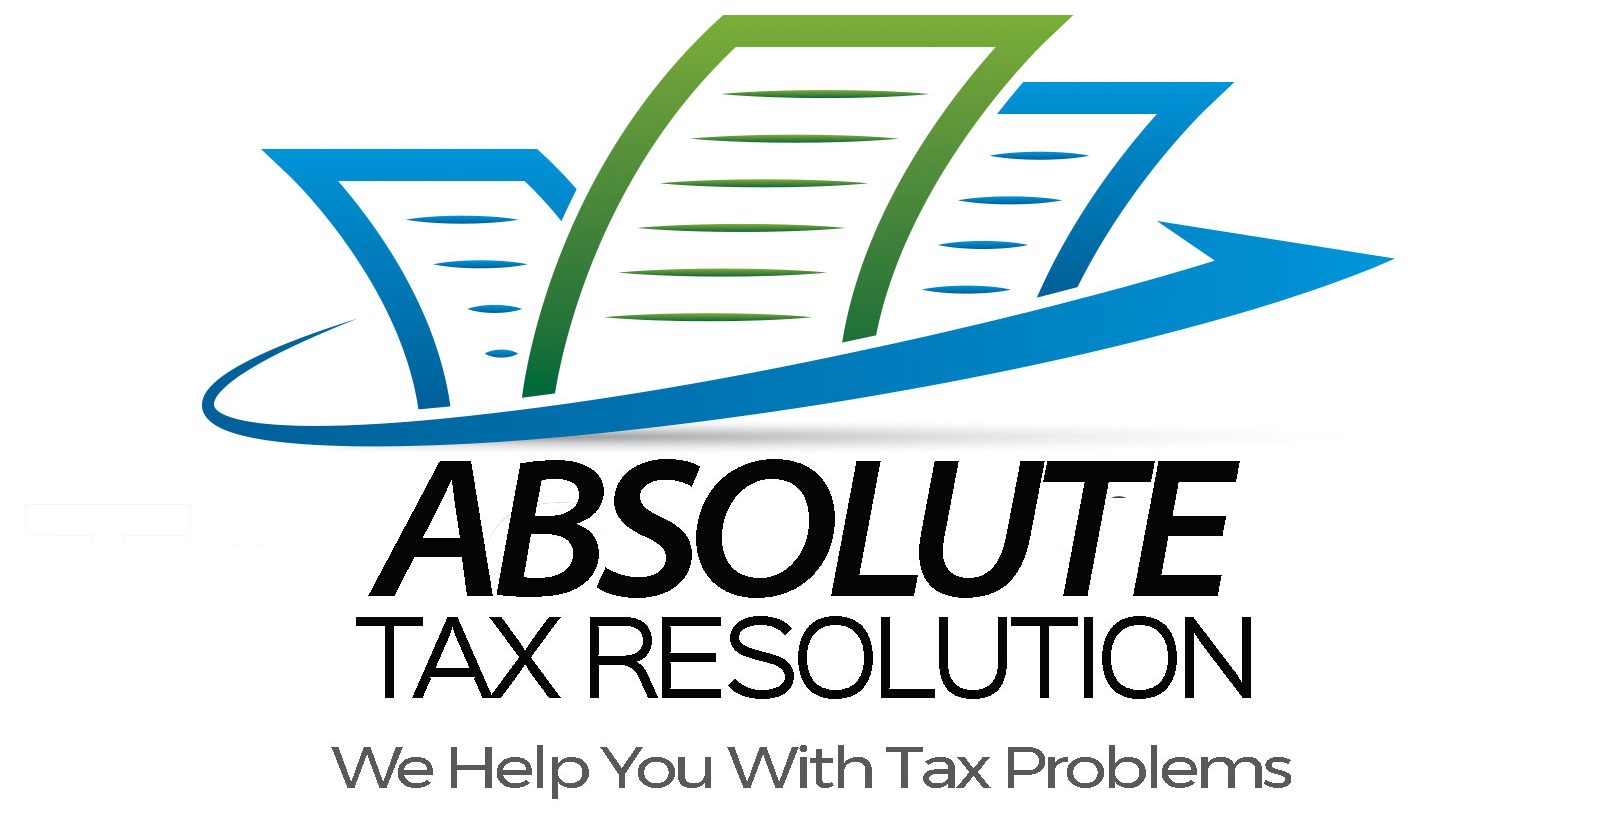 Absolute Tax Resolution